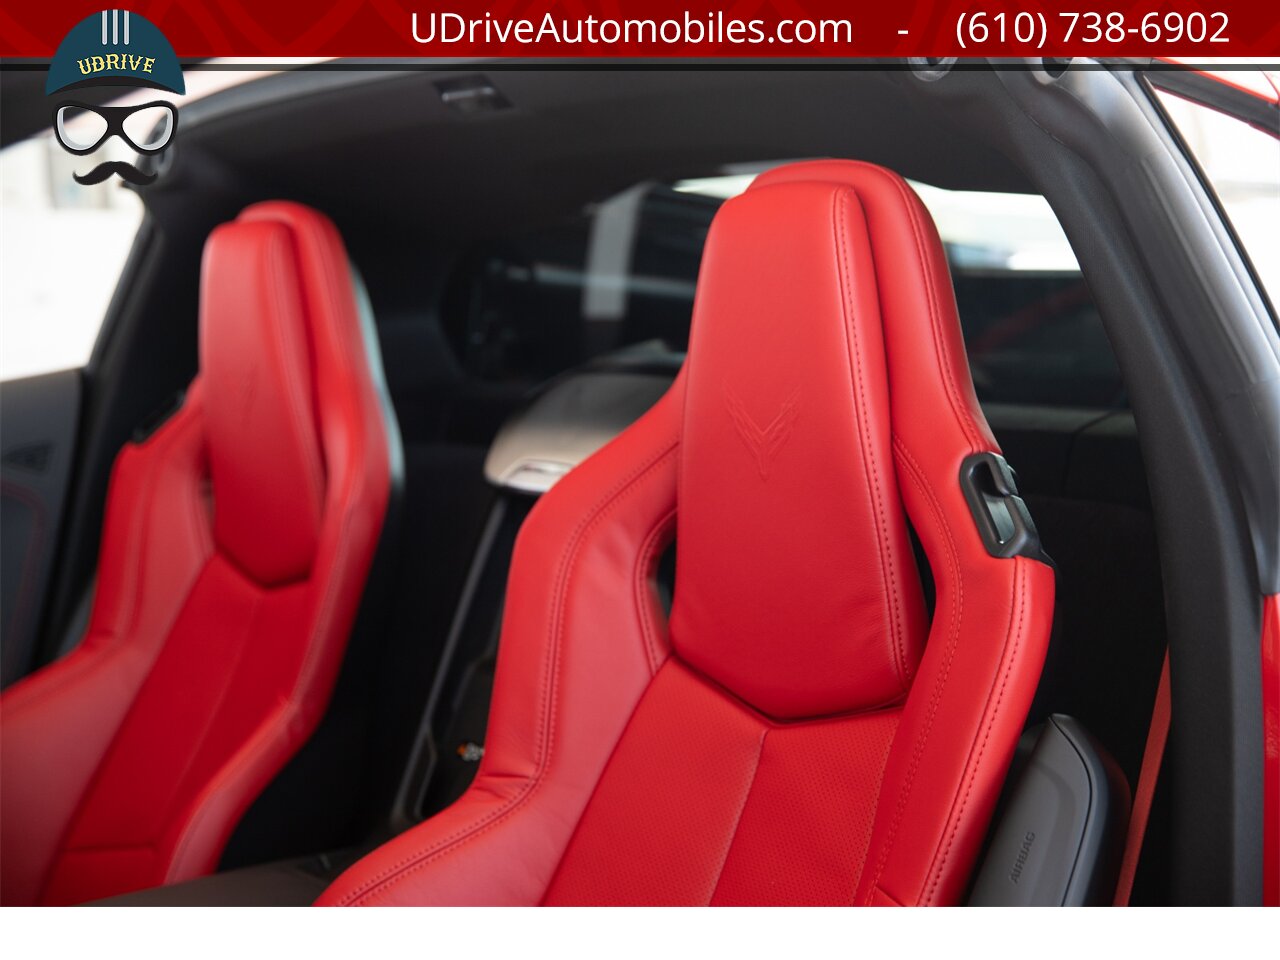 2020 Chevrolet Corvette Stingray 2LT Htd Vent Seats Performance Exhst  Red Calipers Red Seat Belts - Photo 43 - West Chester, PA 19382